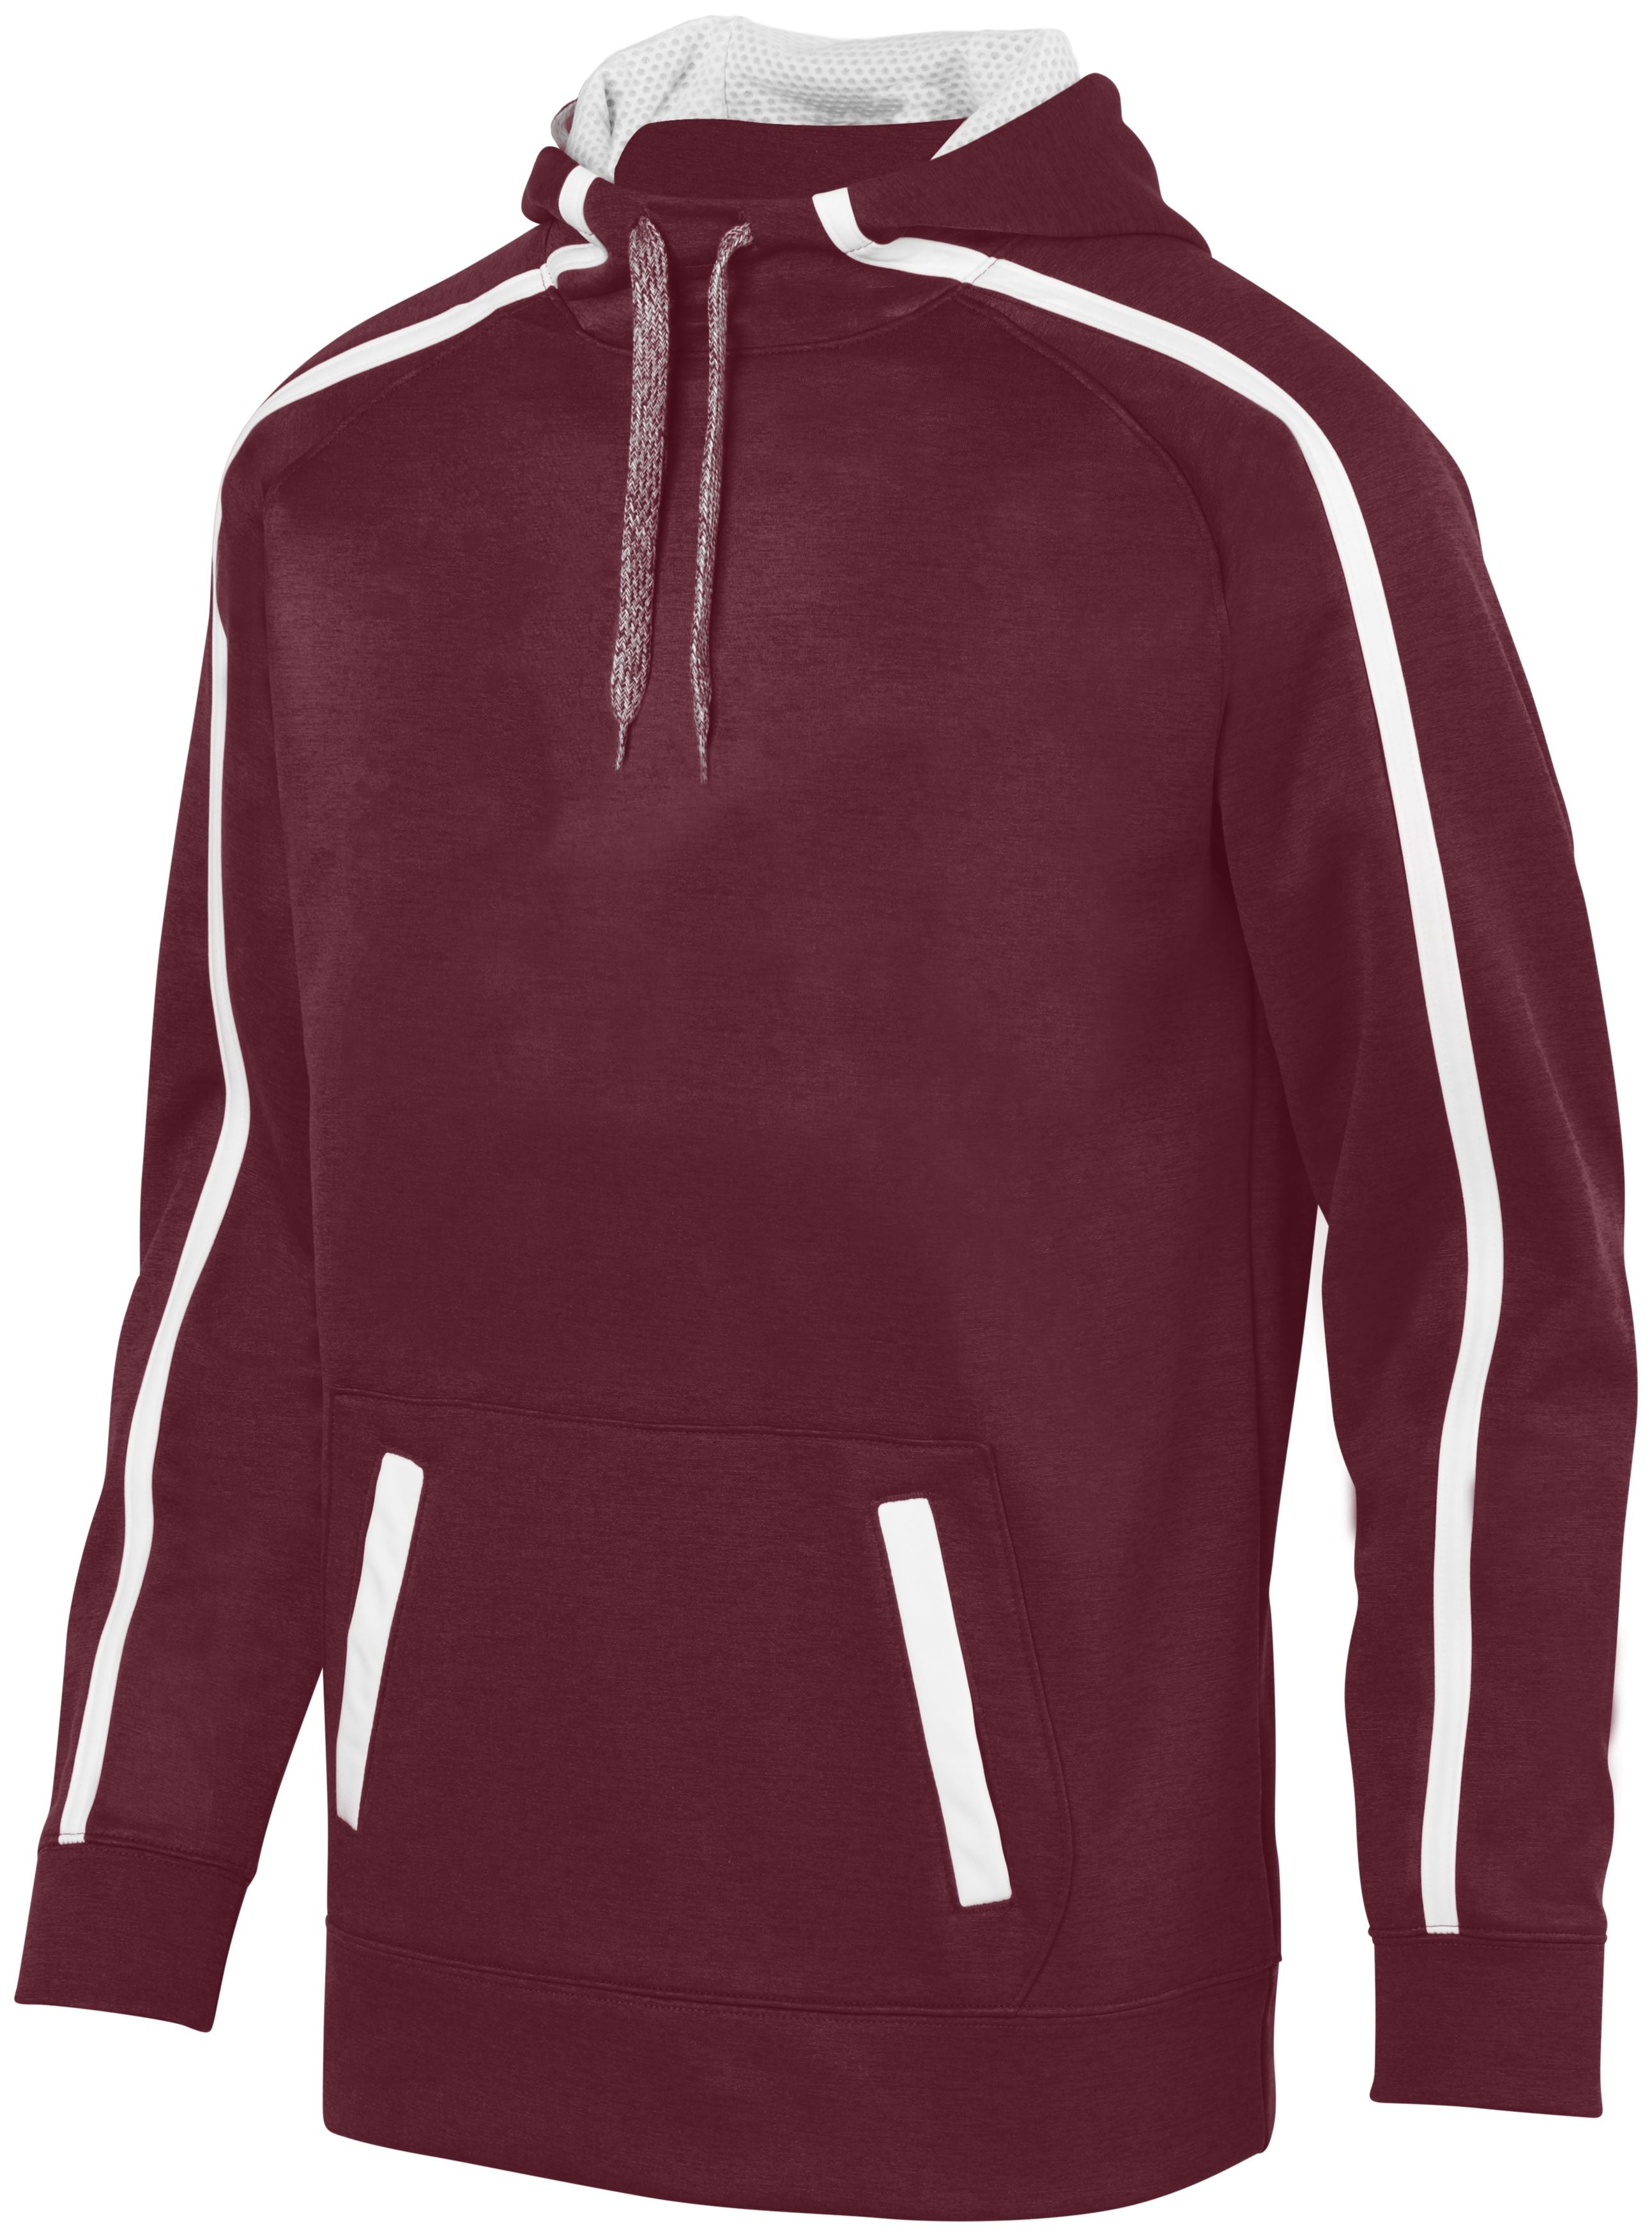 Augusta Sportswear Youth Stoked Tonal Heather Hoodie in Maroon/White  -Part of the Youth, Augusta-Products, Shirts, Tonal-Fleece-Collection product lines at KanaleyCreations.com